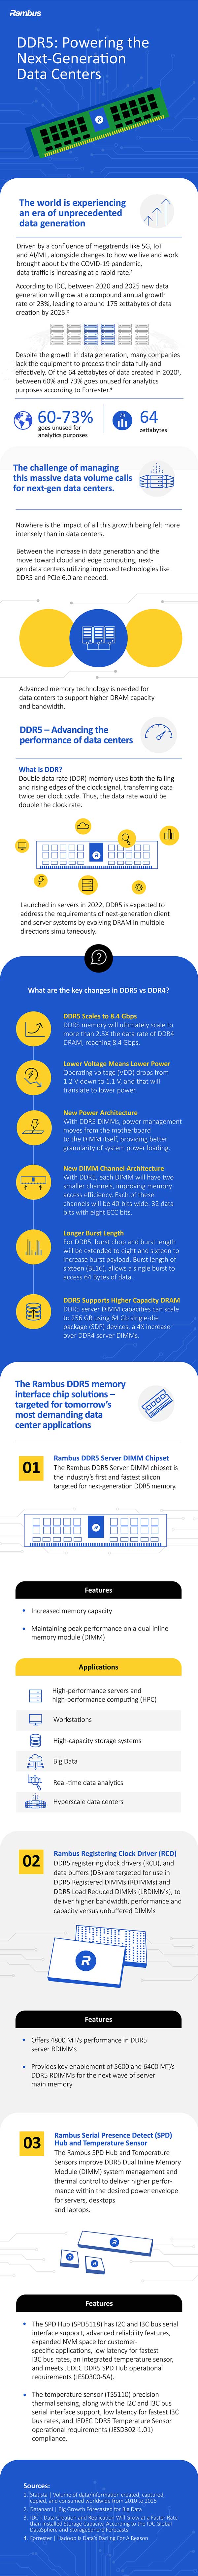 Advanced memory technology is needed to support higher DRAM capacity and bandwidth. See how DDR5 can help.
